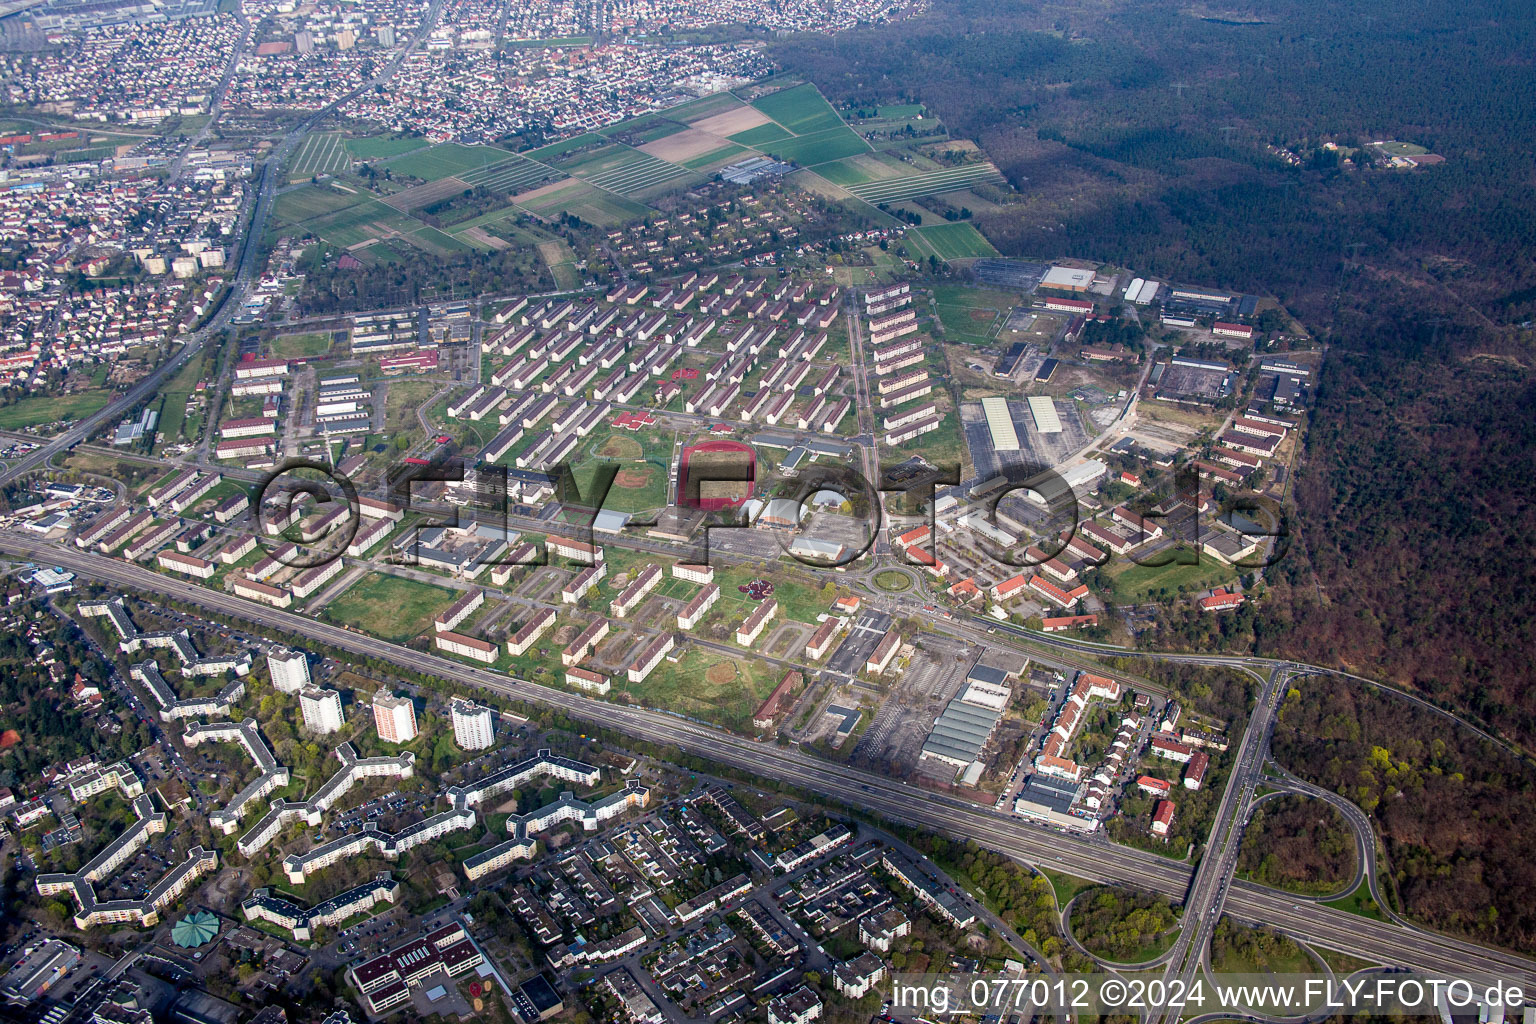 Aerial view of Settlement area in the district Kaefertal in Mannheim in the state Baden-Wurttemberg, Germany